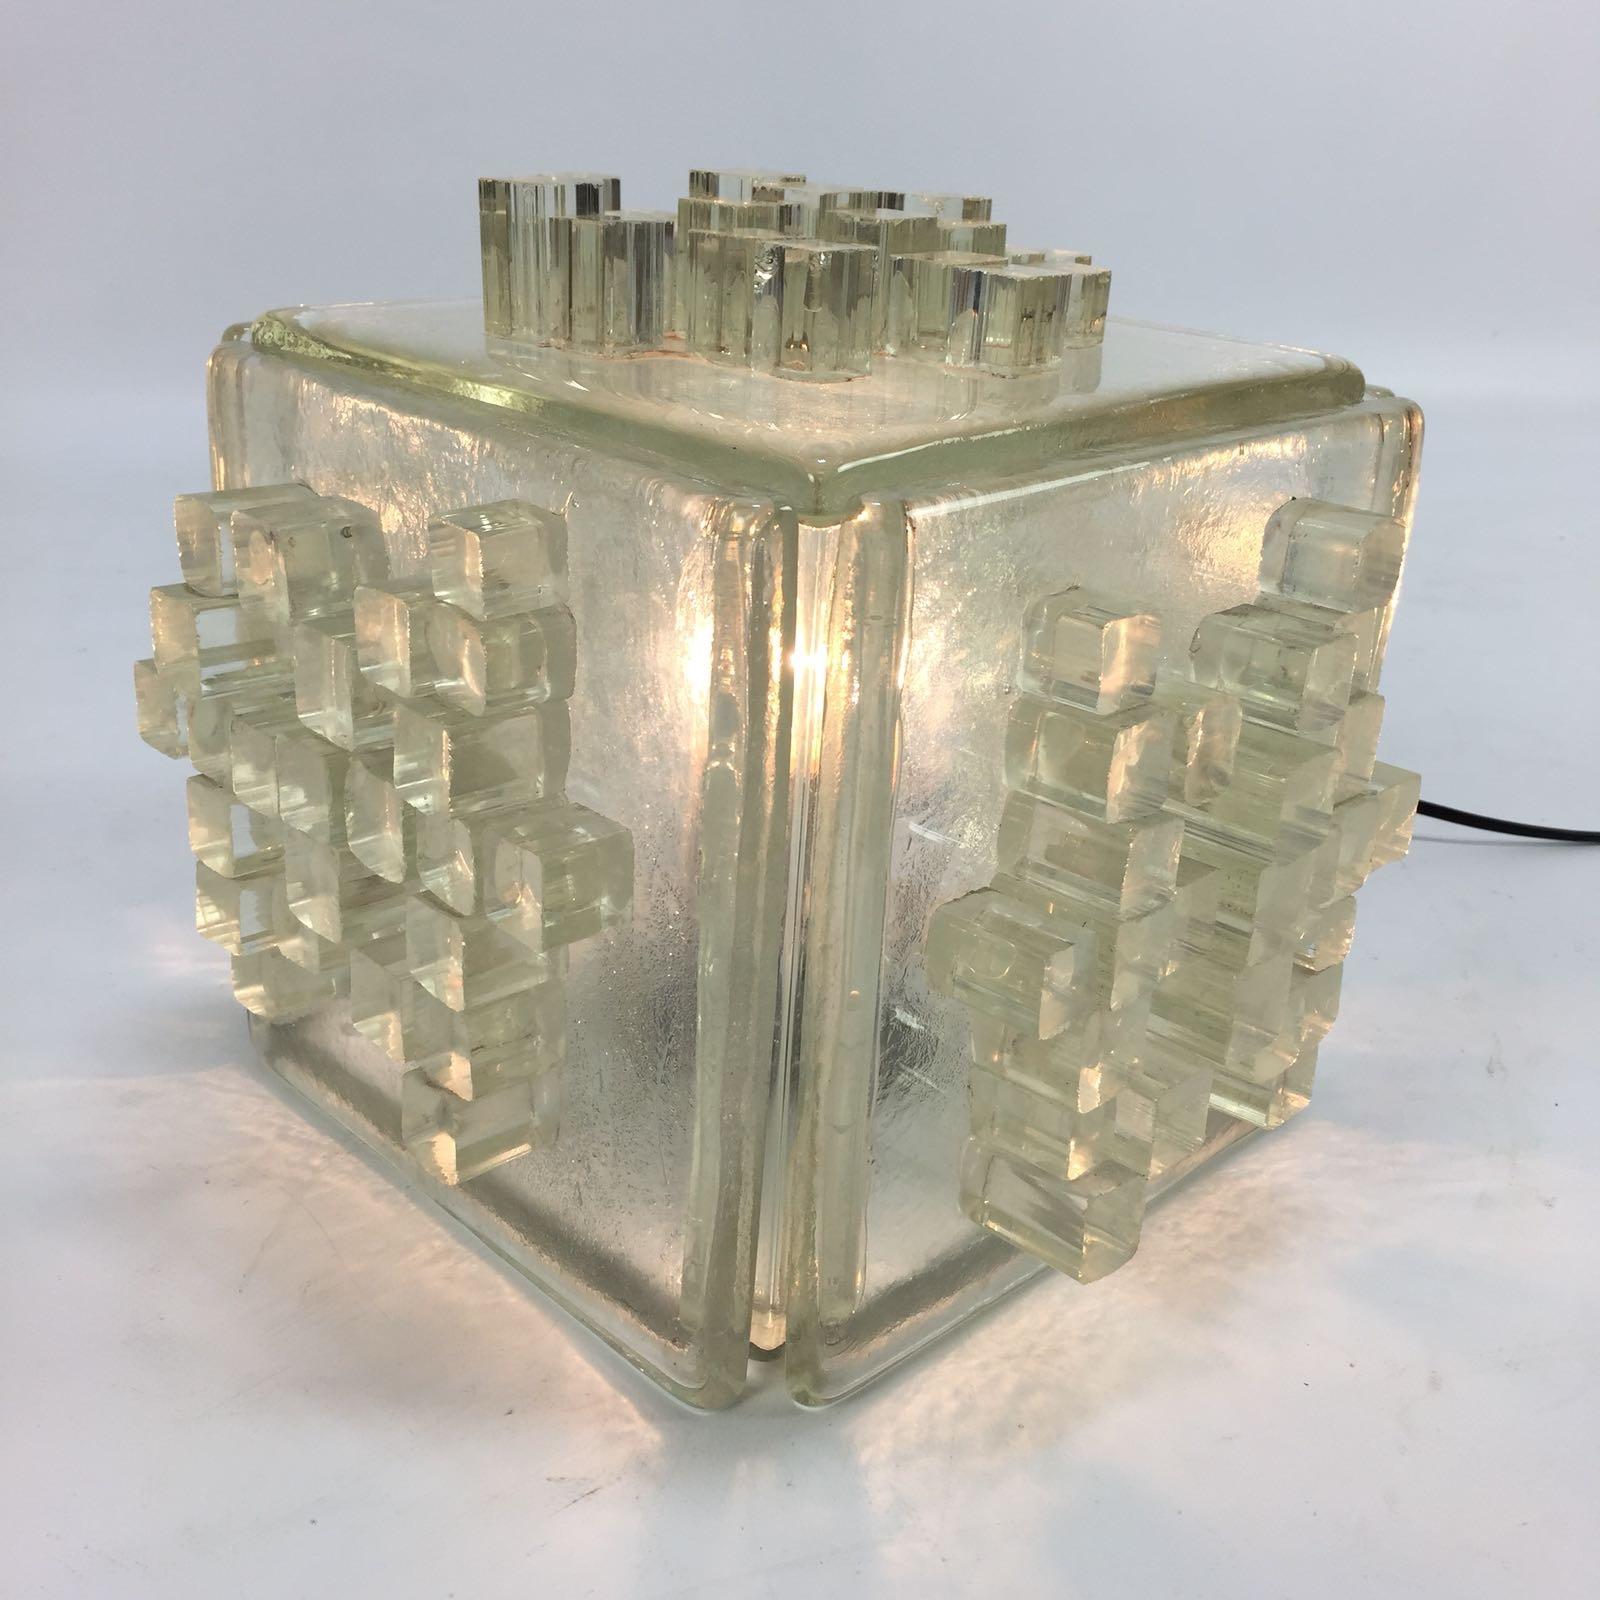 Original Poliarte ‘Apis’ lamp, made in Italy in the 60's.

This lamp is made of thick slabs of raw crystal with a graphic pattern of glass cubes on each side. 
The raw glass creates a great light effect when lit. 

Poliarte started to produce